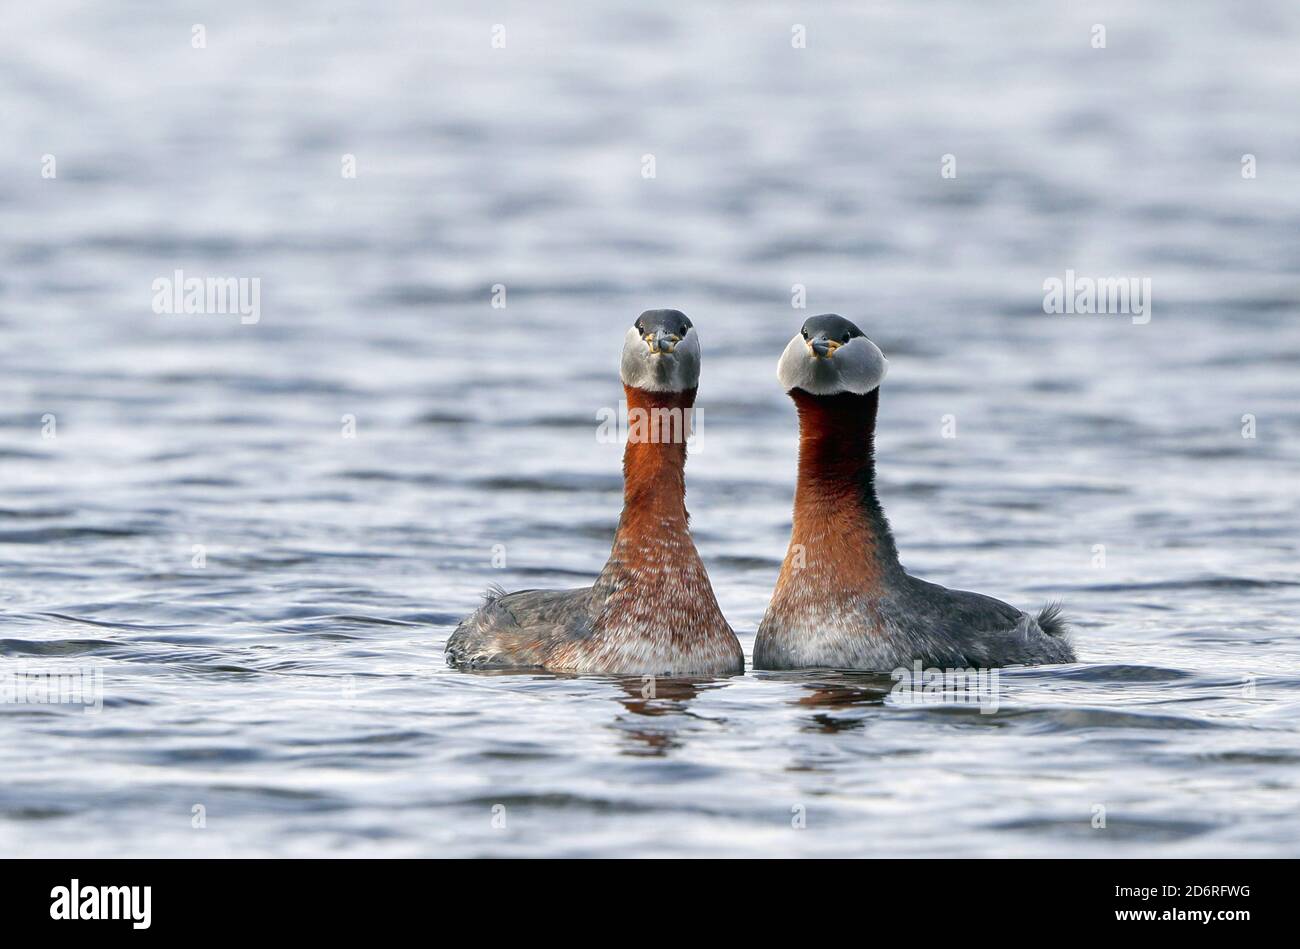 red-necked grebe (Podiceps grisegena), Courtship of two adult Red-necked Grebes on a lake, pair displaying on the water, Denmark Stock Photo